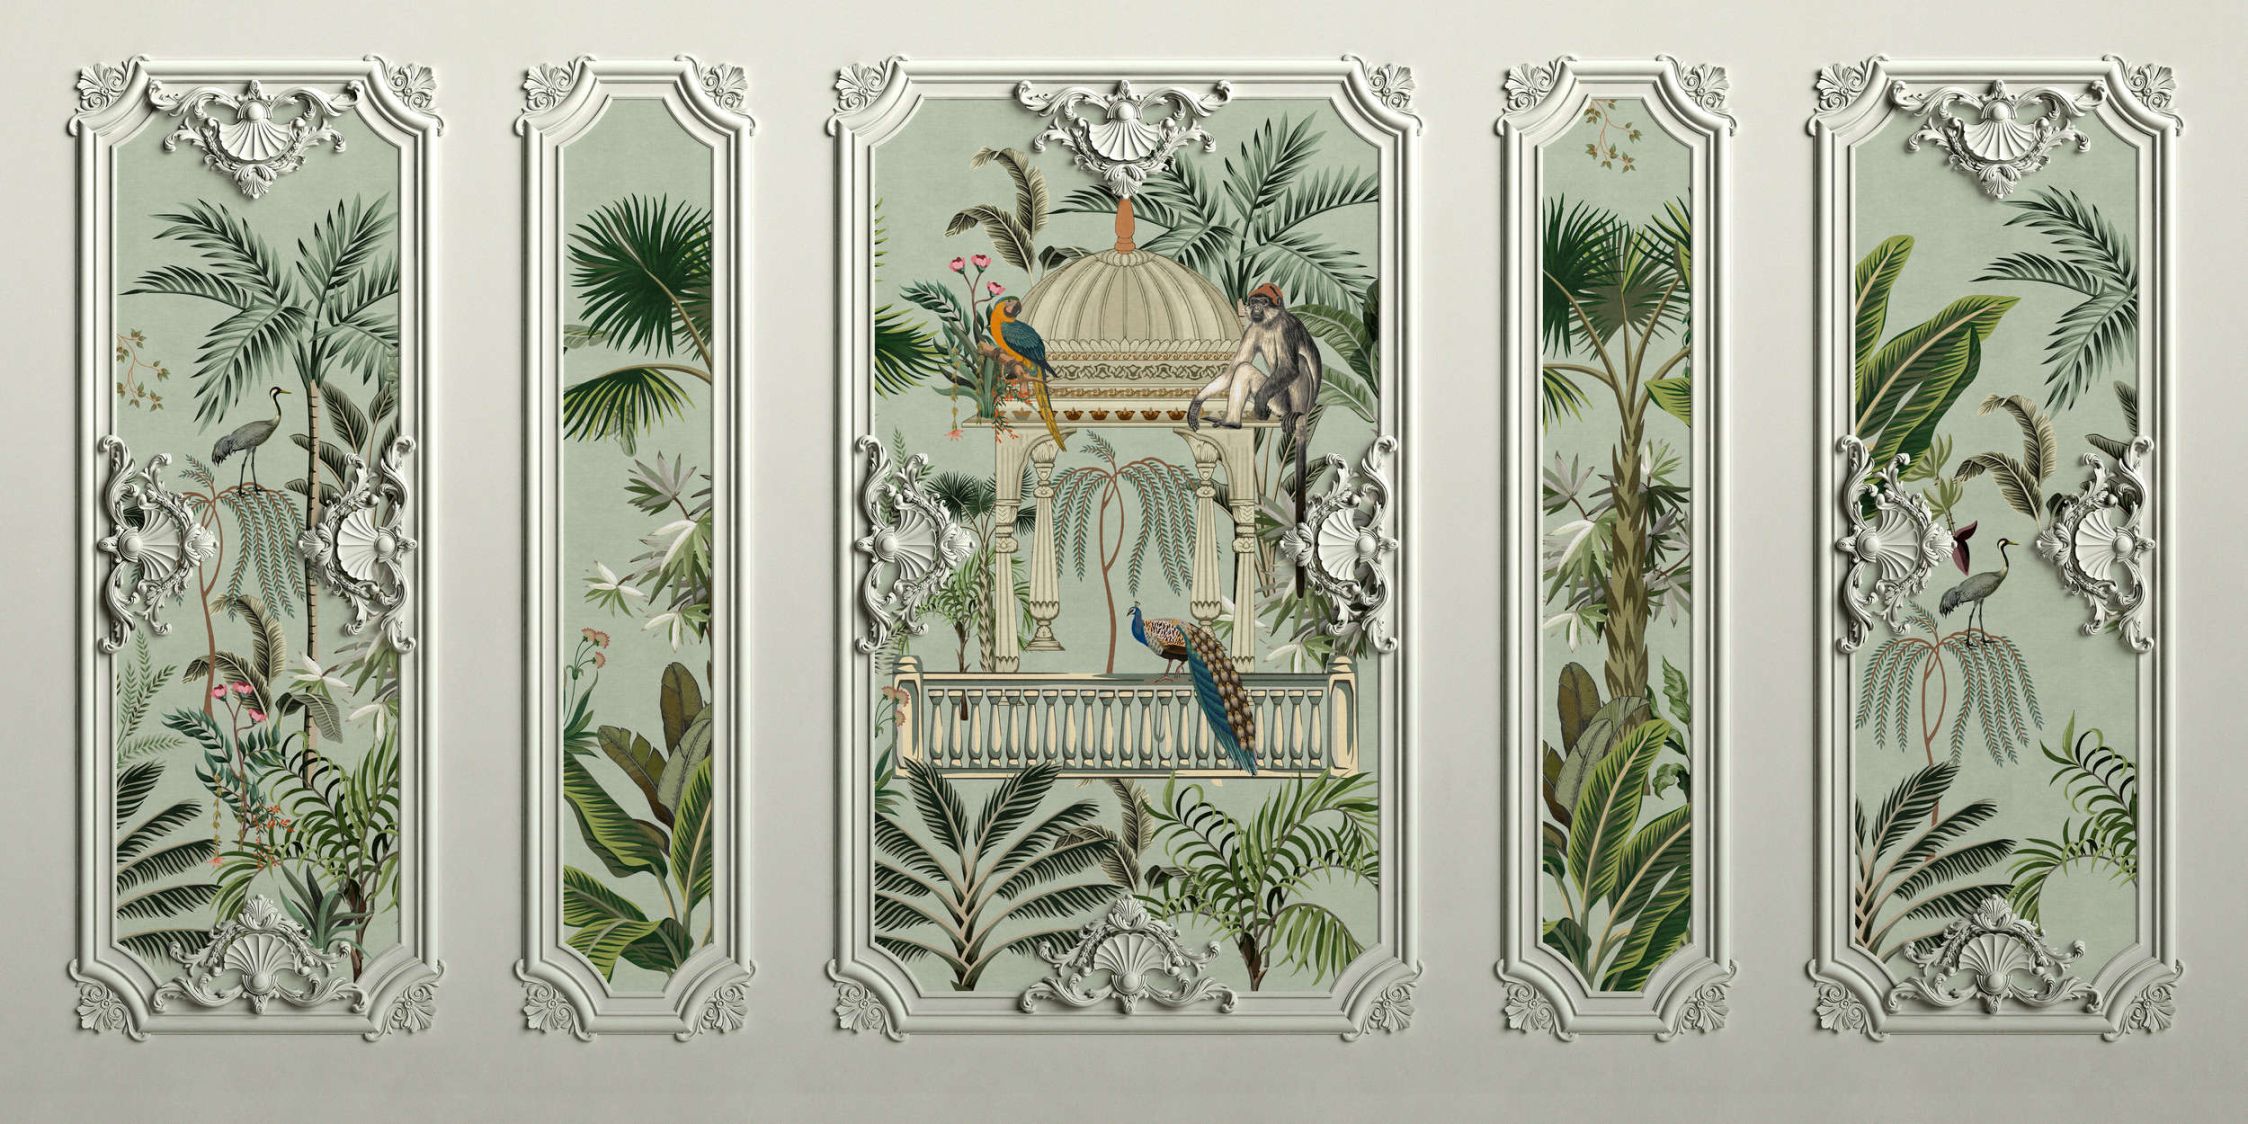             Photo wallpaper »darjeeling« - Stucco frame look with birds & palm trees with linen texture in the background - Smooth, slightly pearlescent non-woven fabric
        